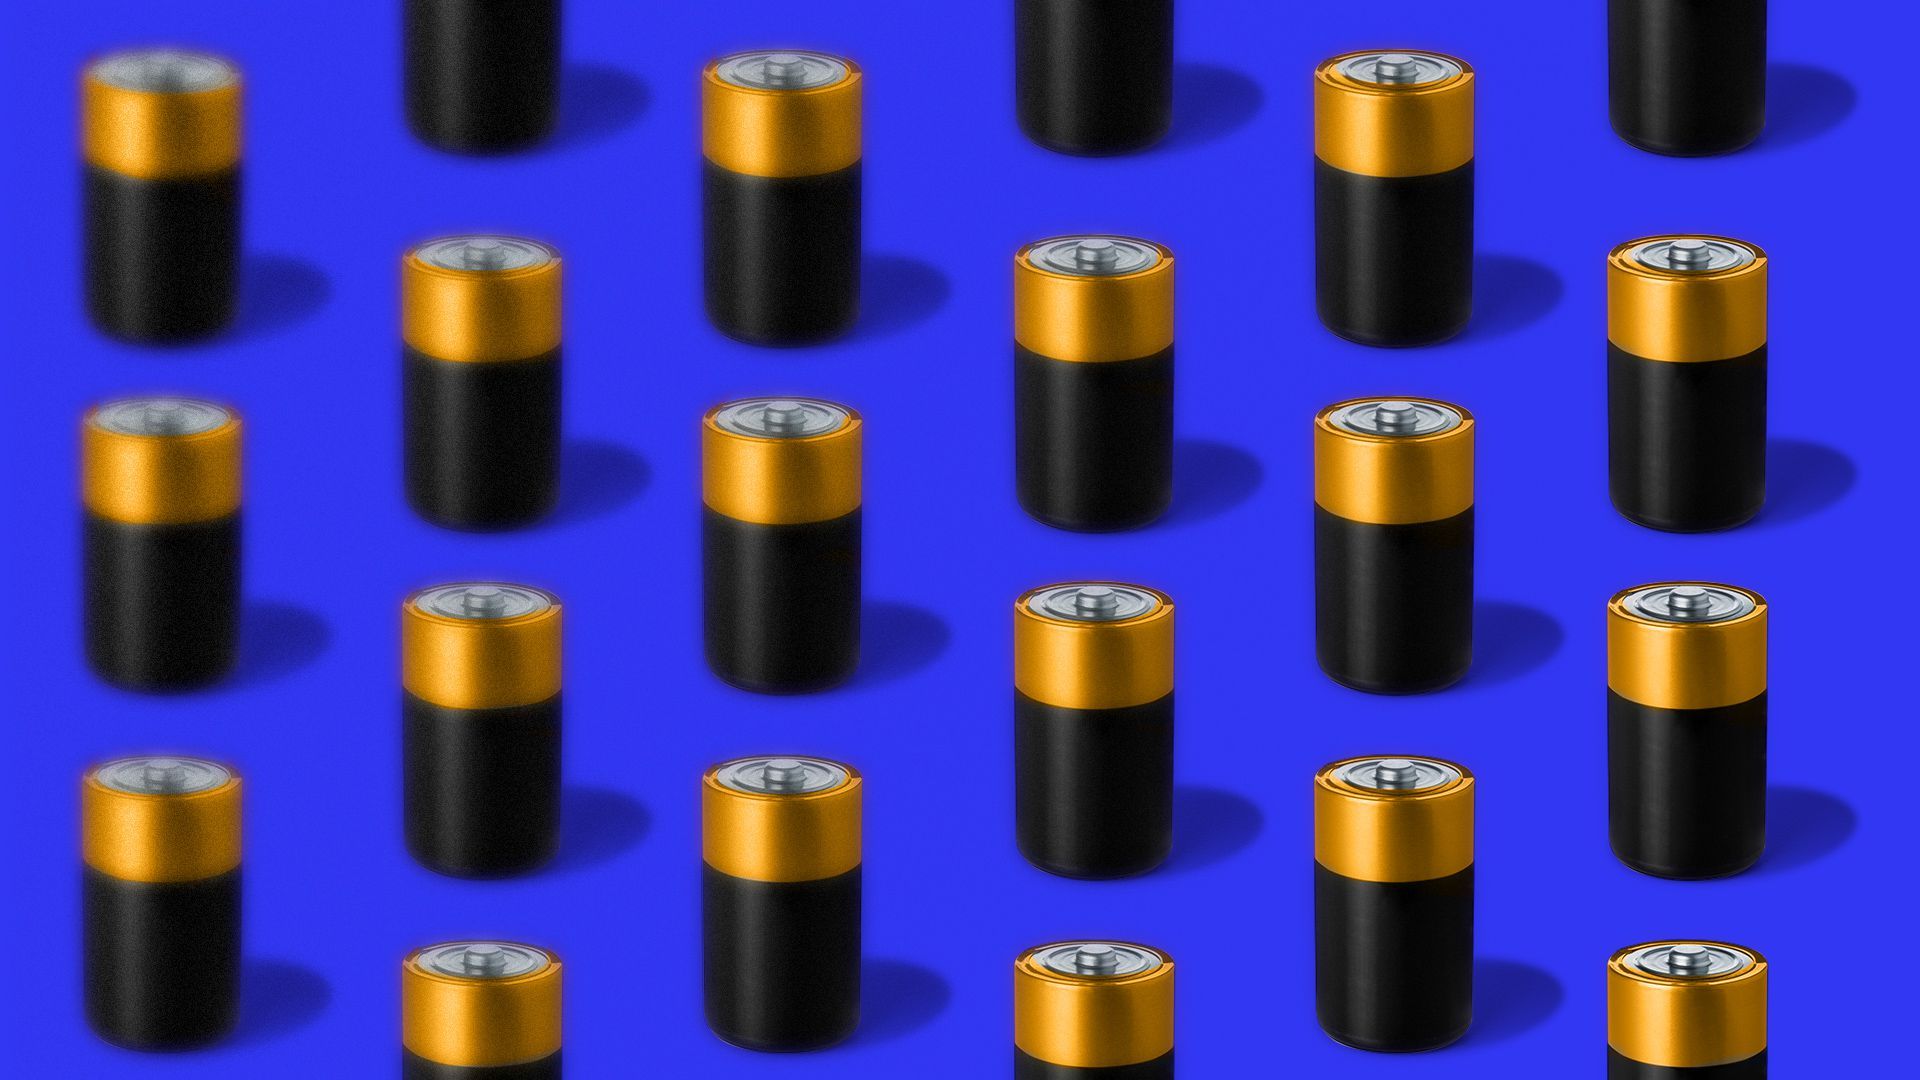 Illustration of a blurry pattern of batteries coming into focus.